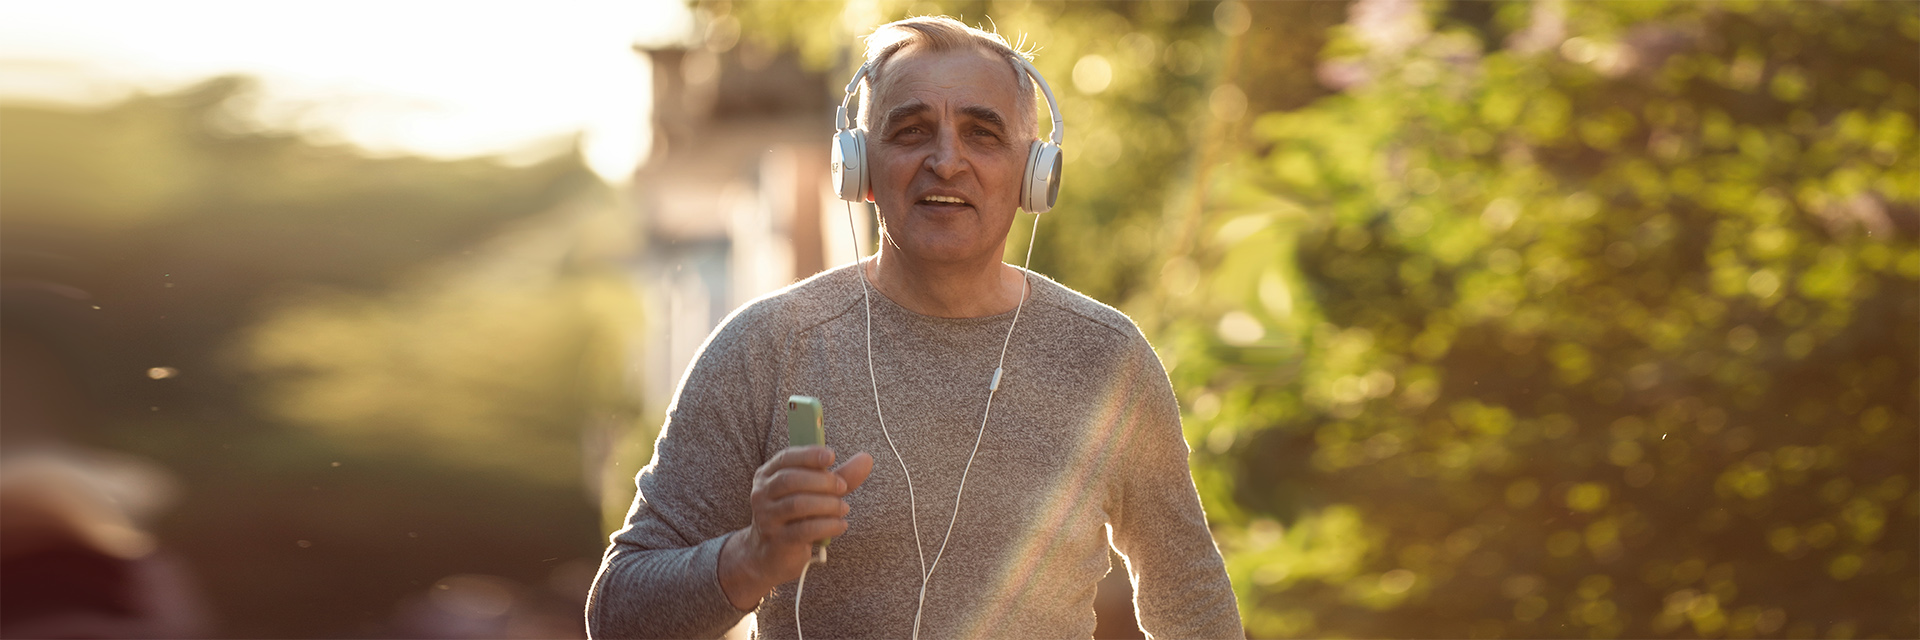 Mature man running while on phone with headphones